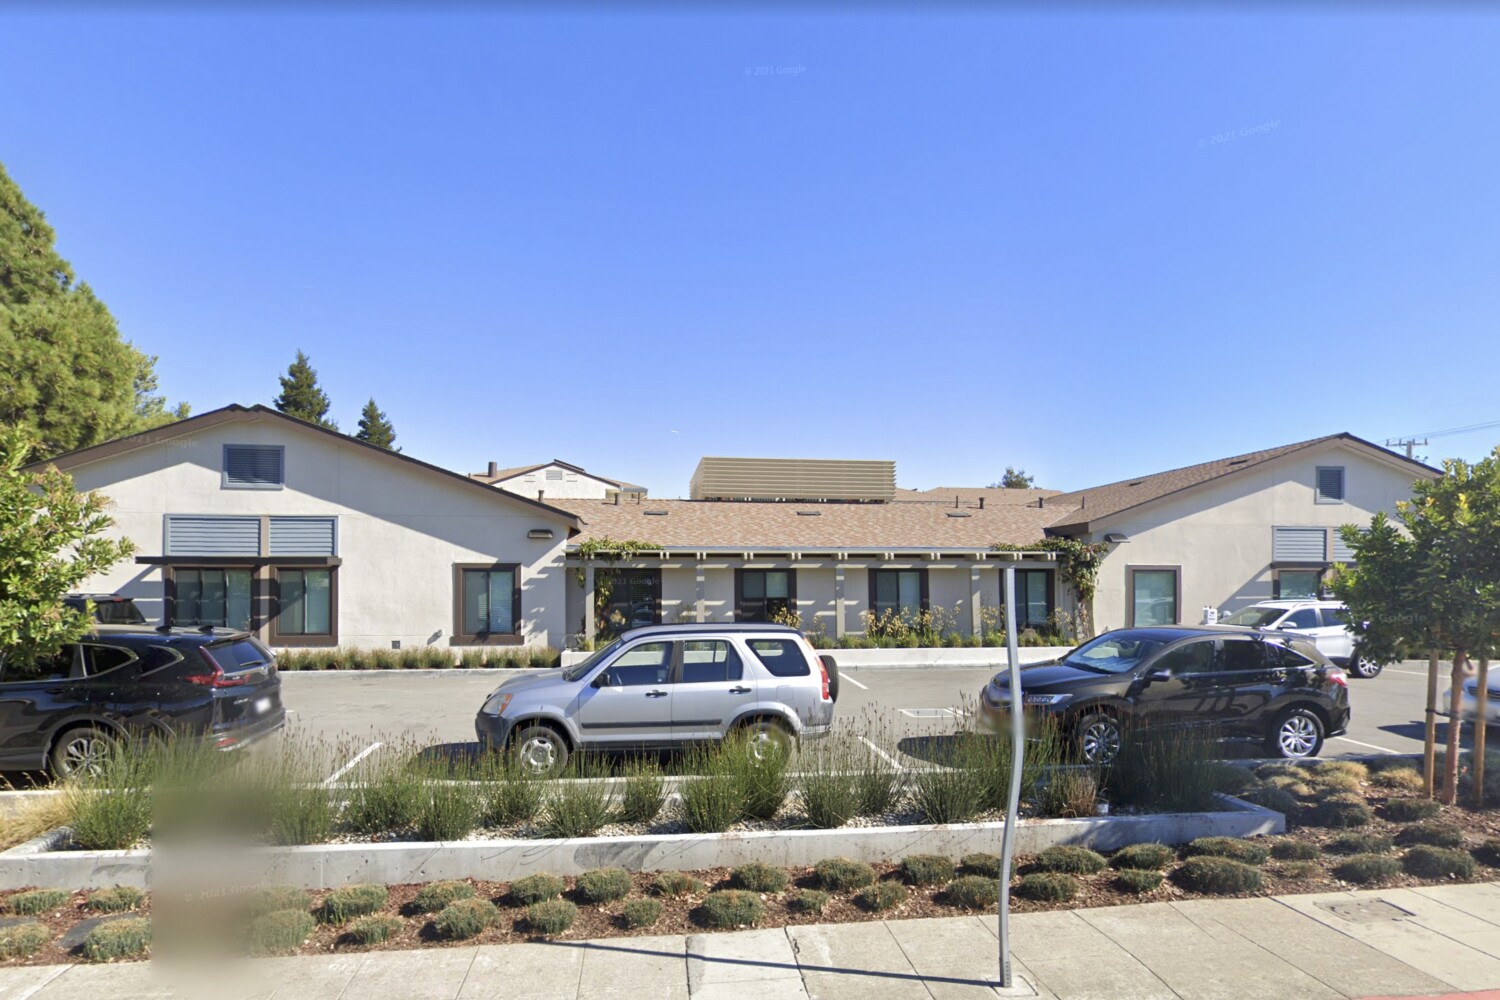 Woman dies after Bay Area care home reportedly serves dishwashing liquid instead of juice